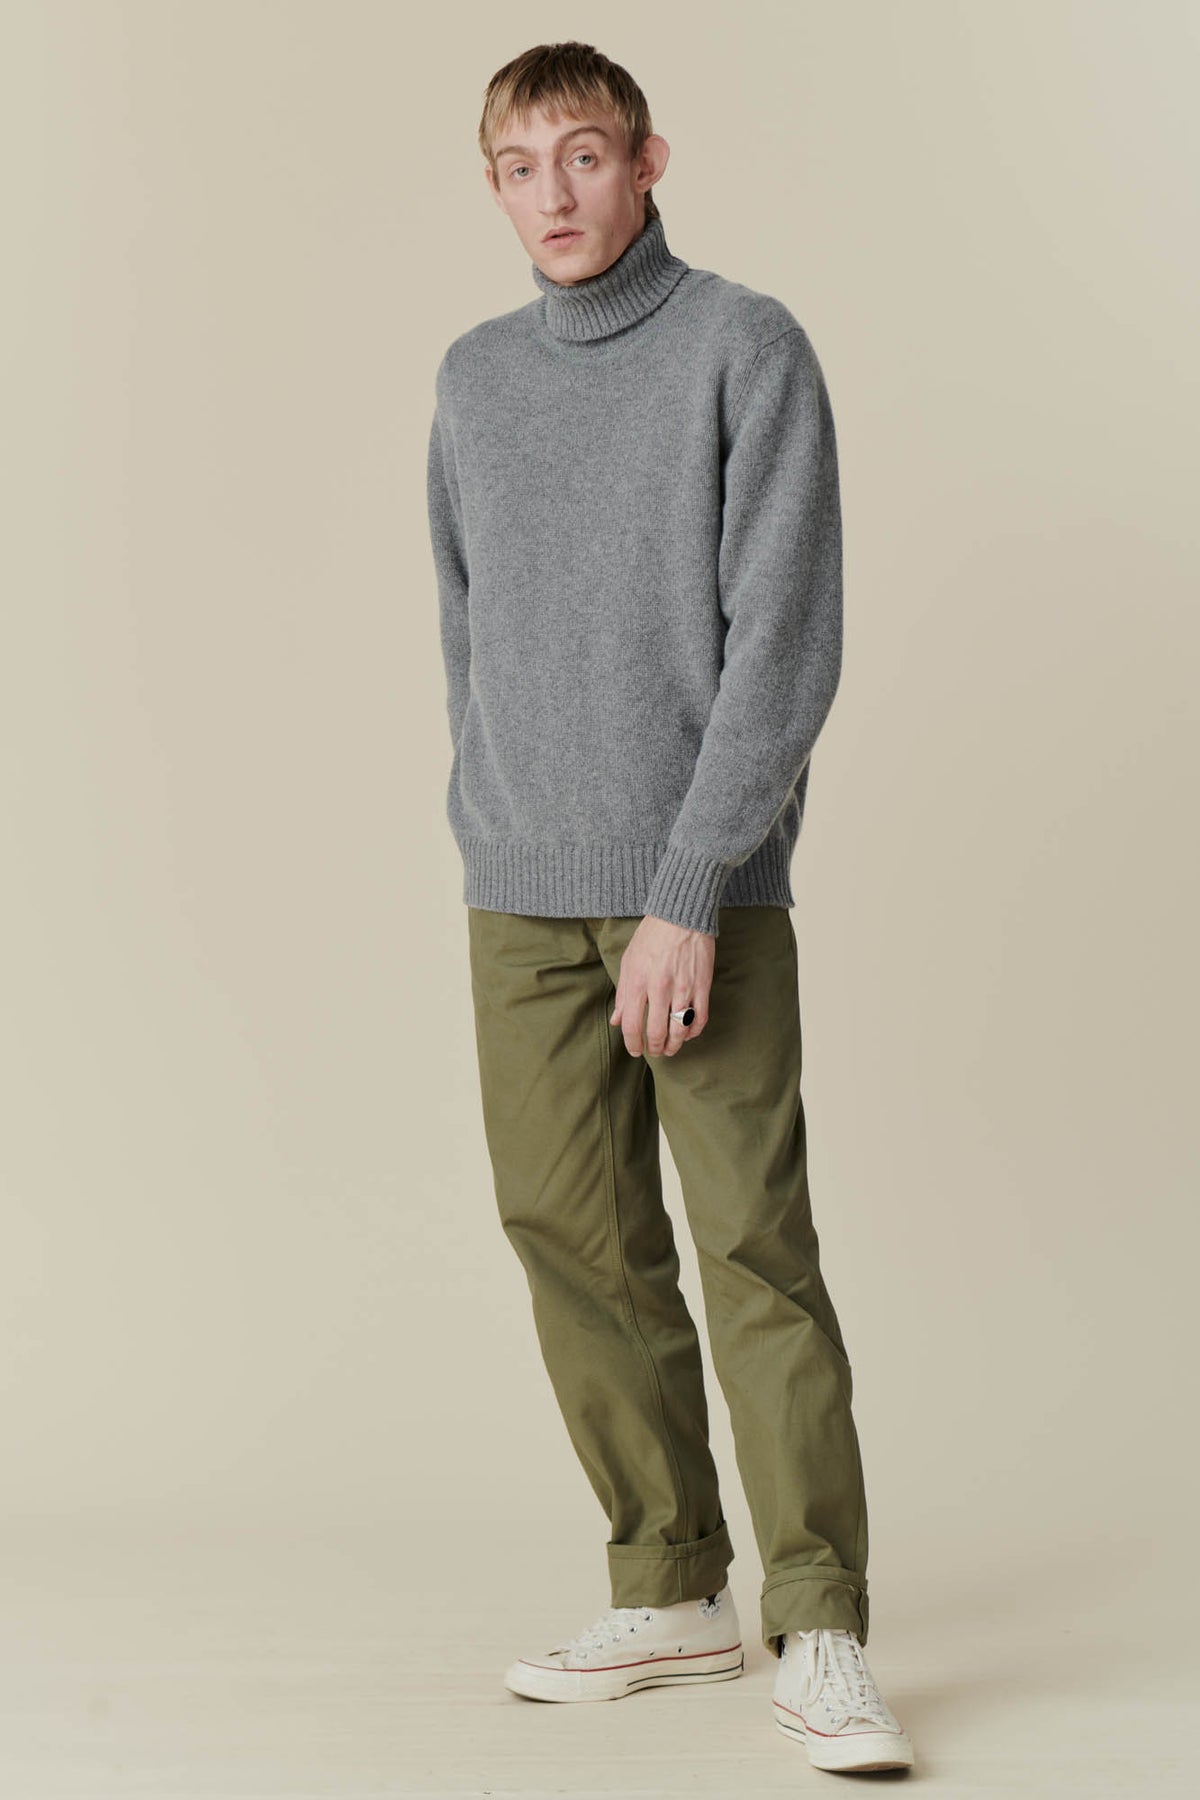 
            Full body shot of male wearing grey roll neck jumper and olive cameraman pant